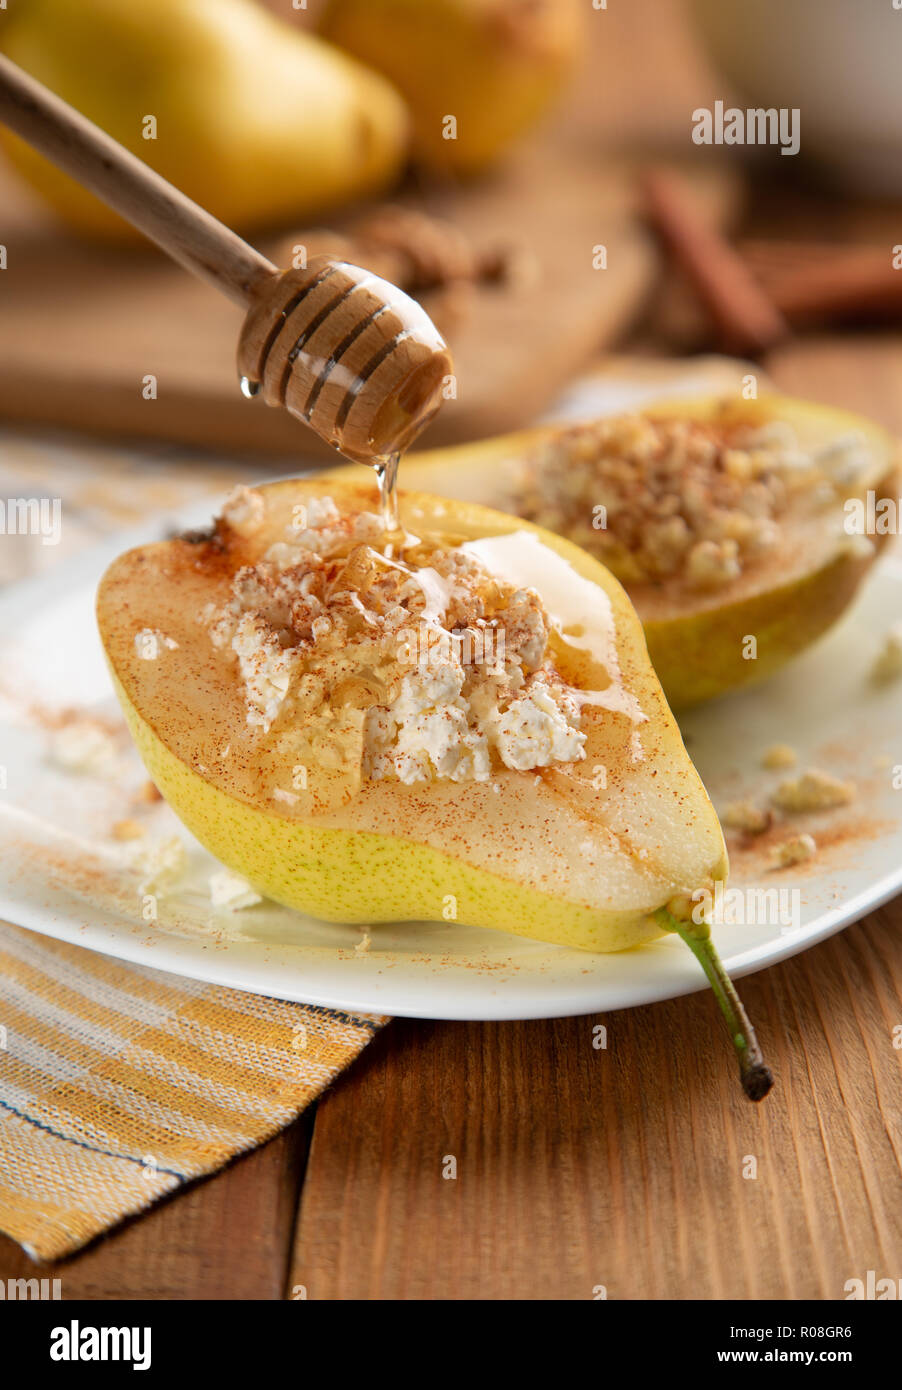 Half pear with cottage cheese, nuts, honey and cinnamon on white dish. It is watered with honey. Wooden table, background blurred. Concept - Healthy f Stock Photo